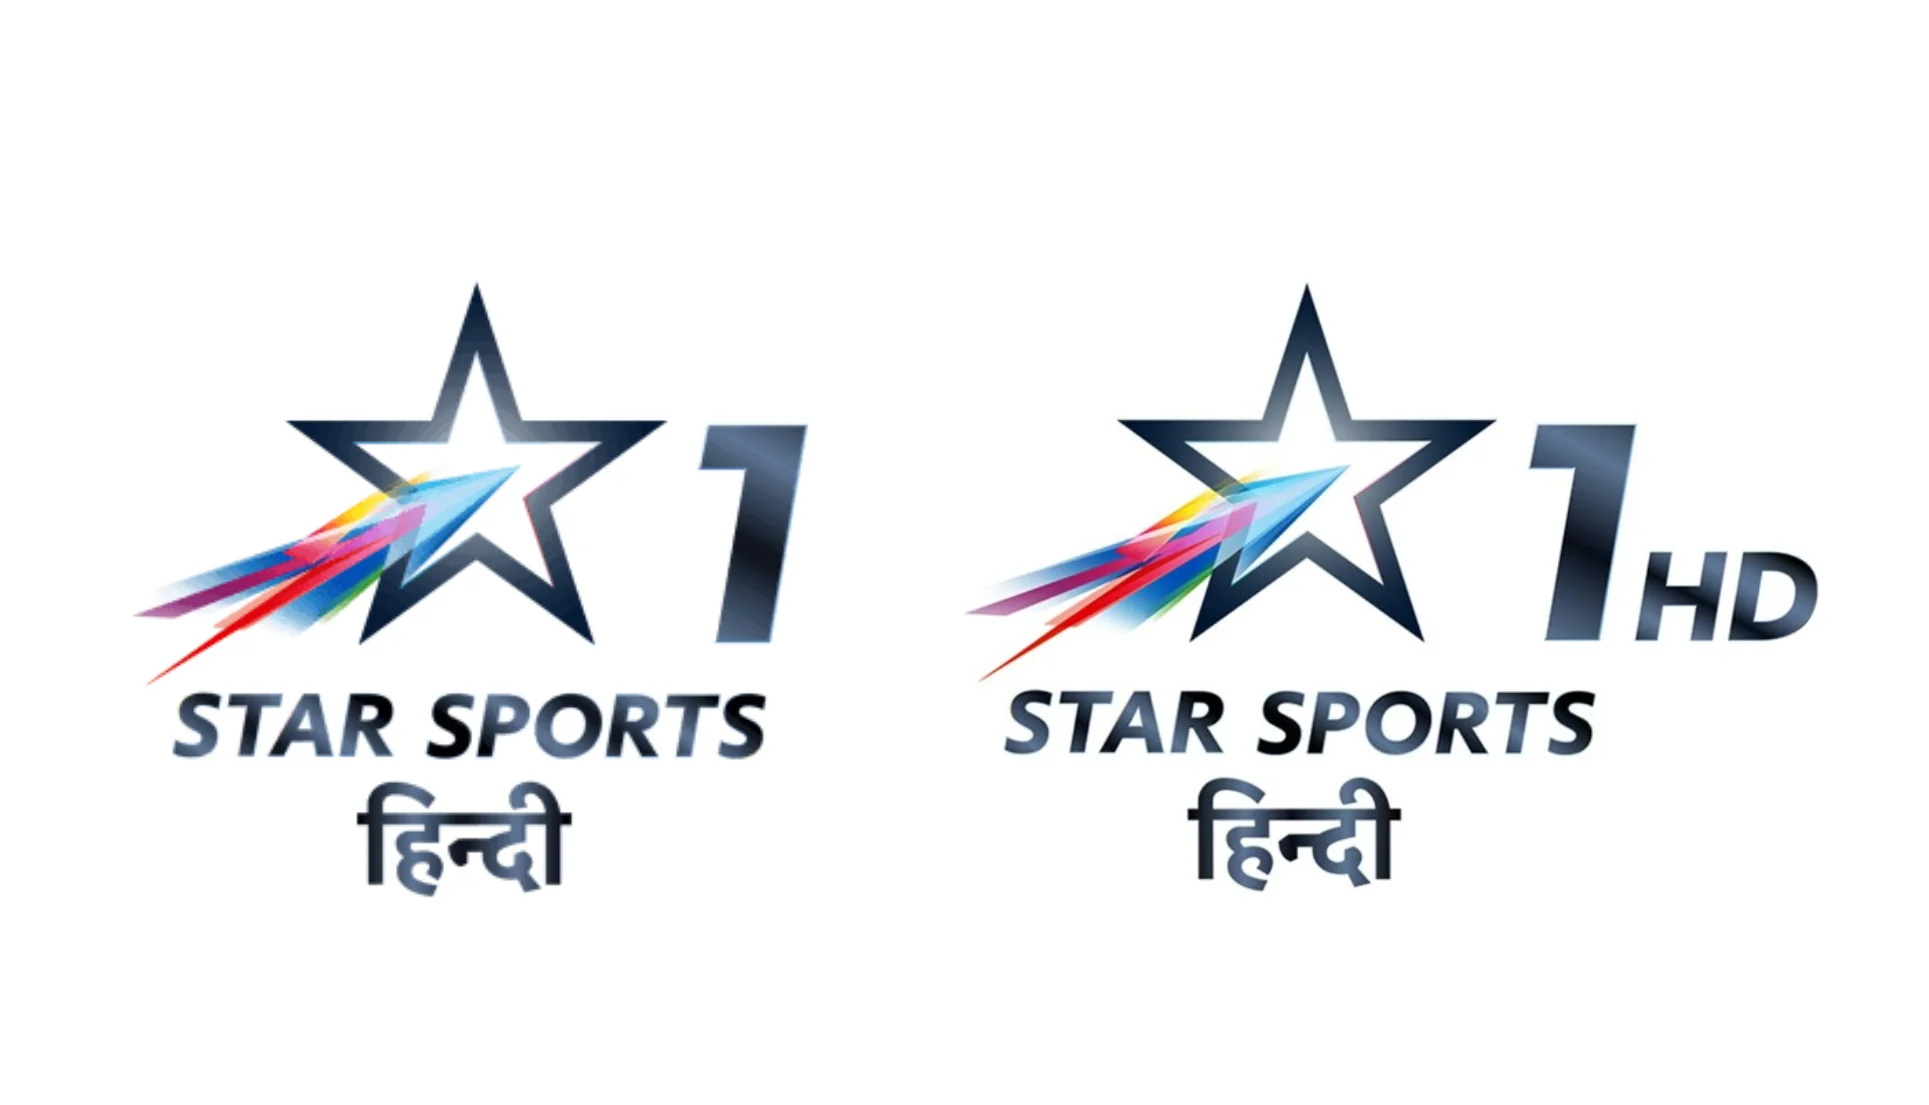 Dish TV to offer Star Sports channels for free to new customers